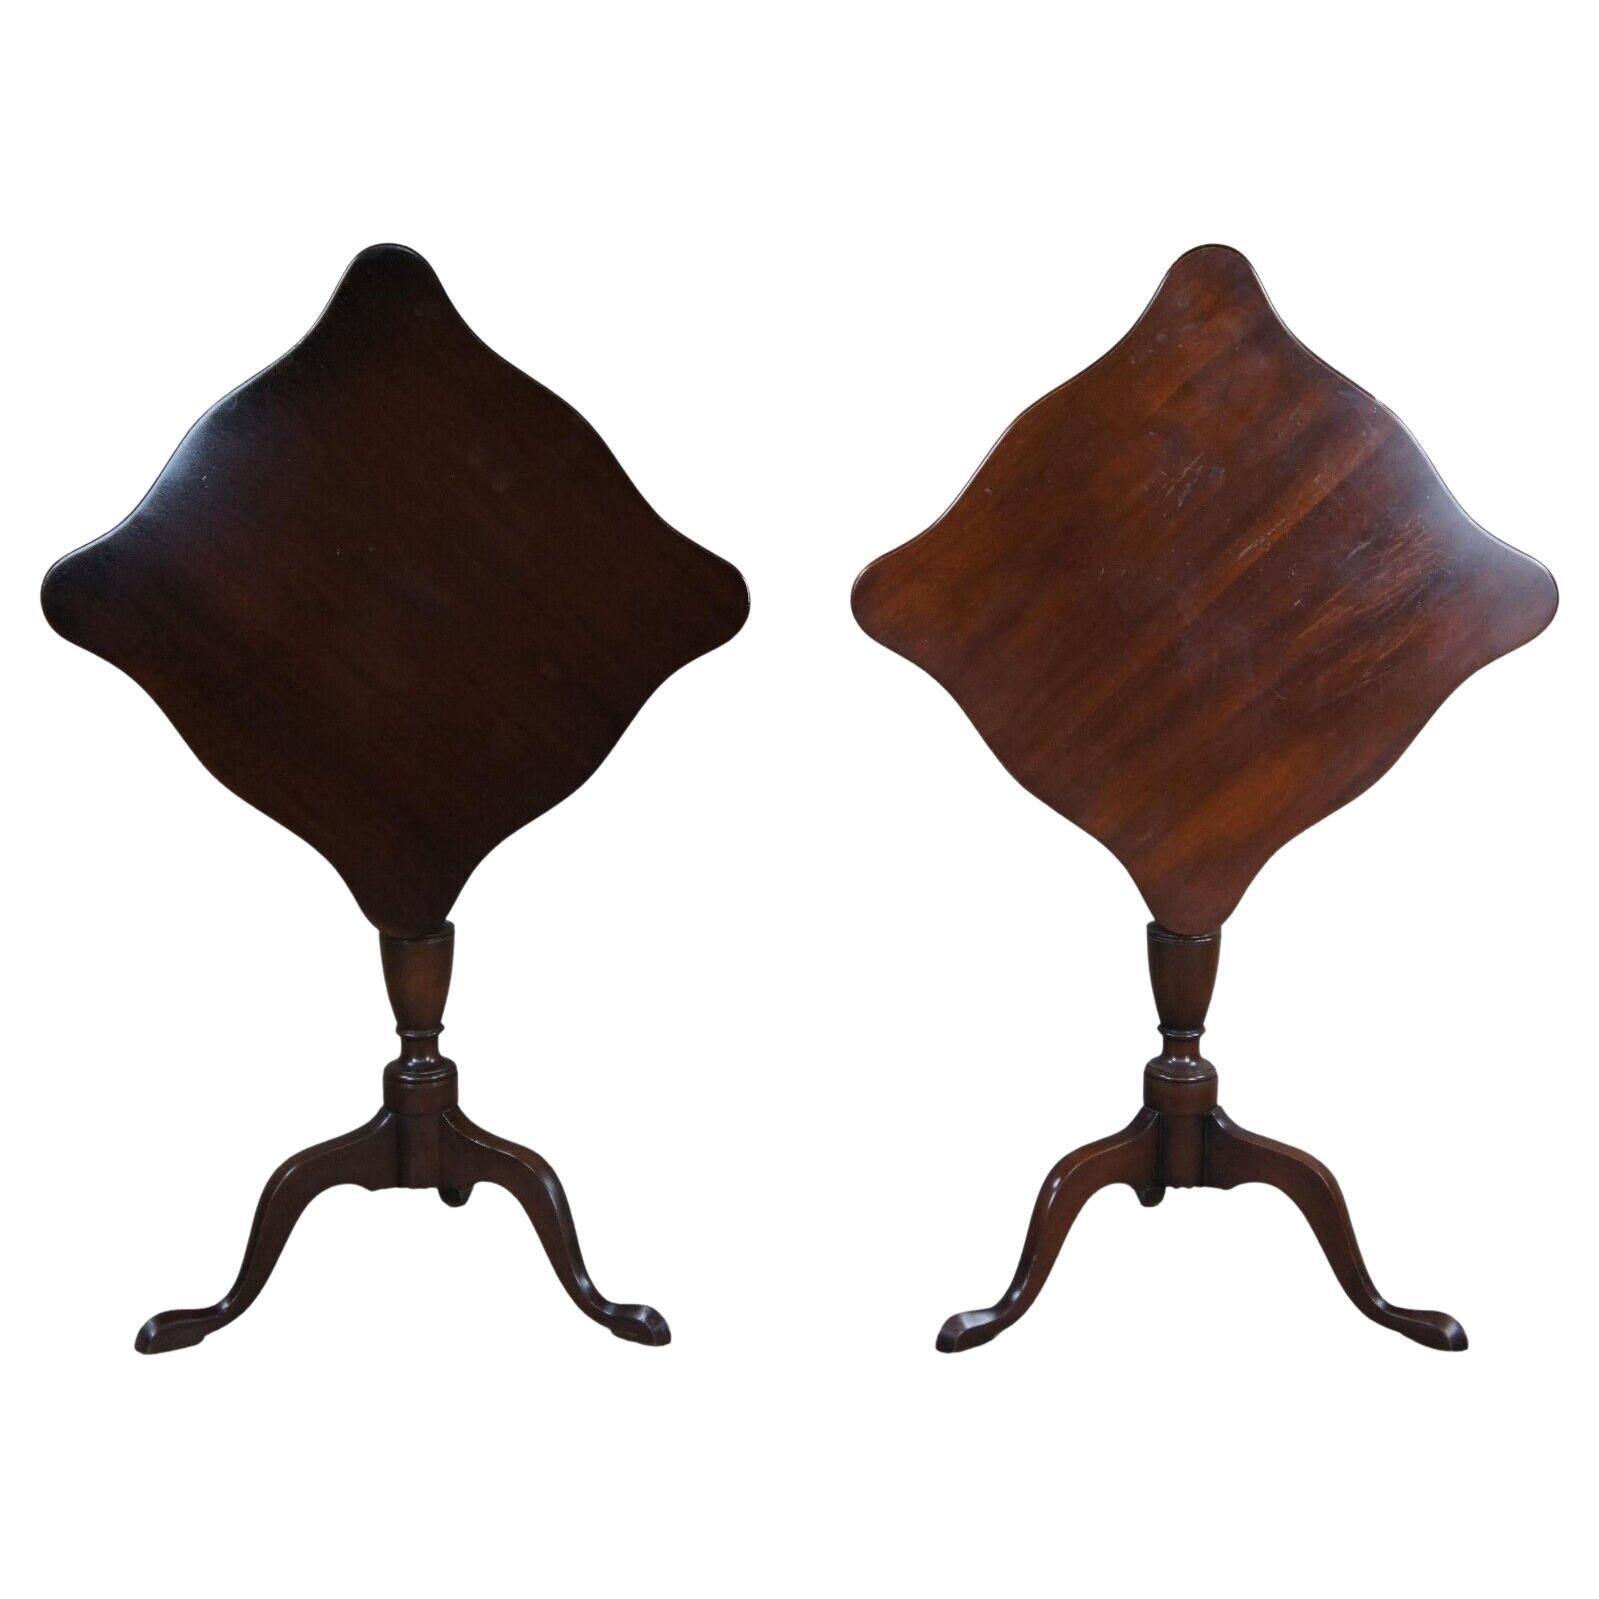 2 Kittinger Colonial Williamsburg Federal Mahogany Tilt Top Tables Candle Stands For Sale